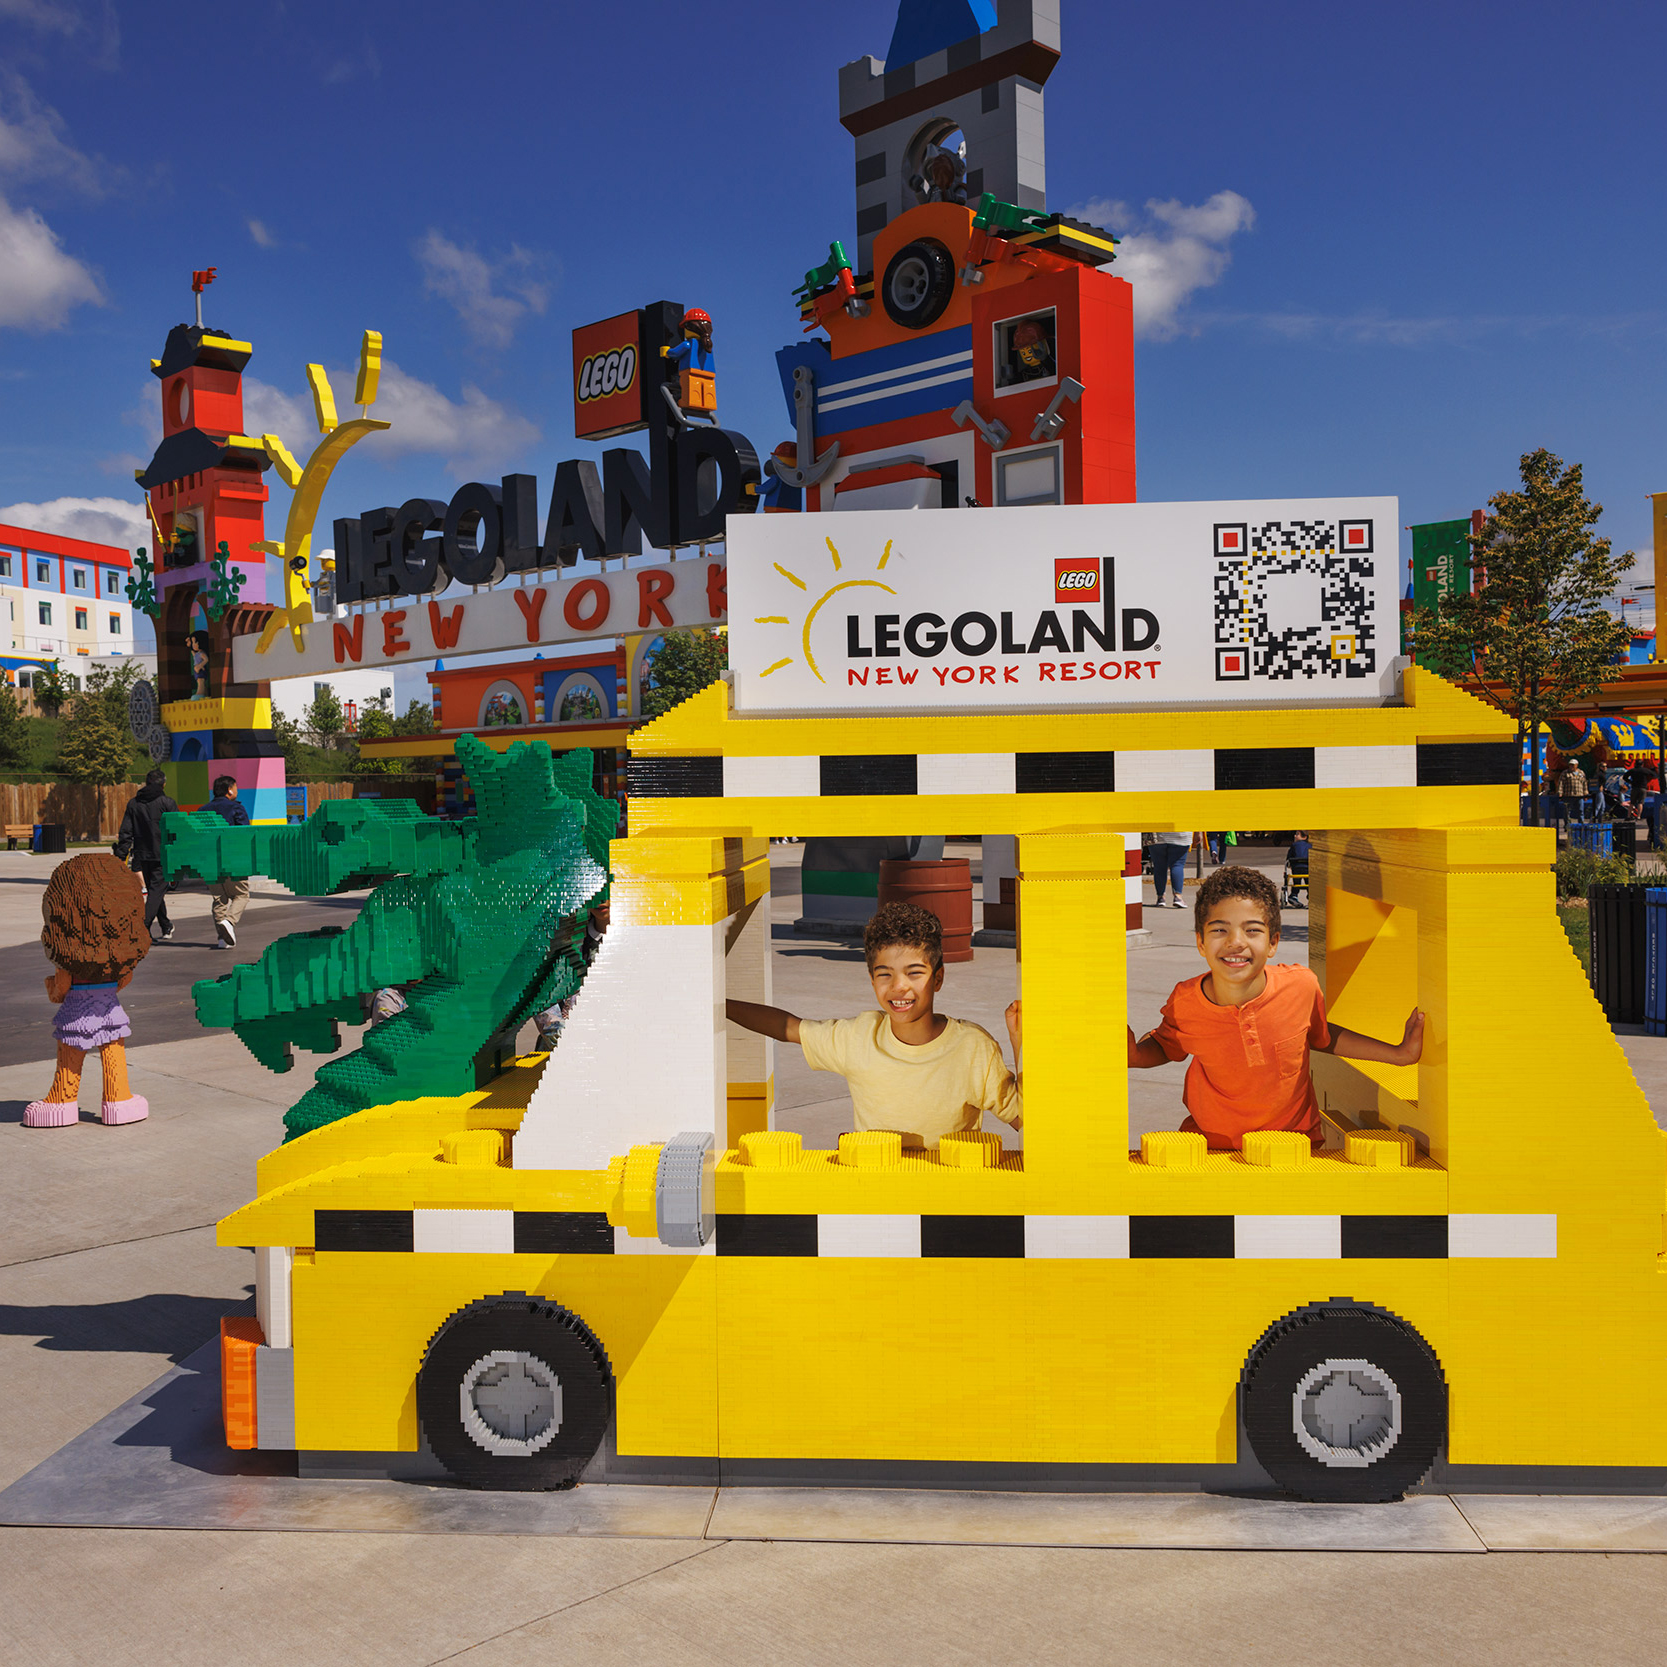 Boys Pose for a Photo in a Taxi made from LEGO